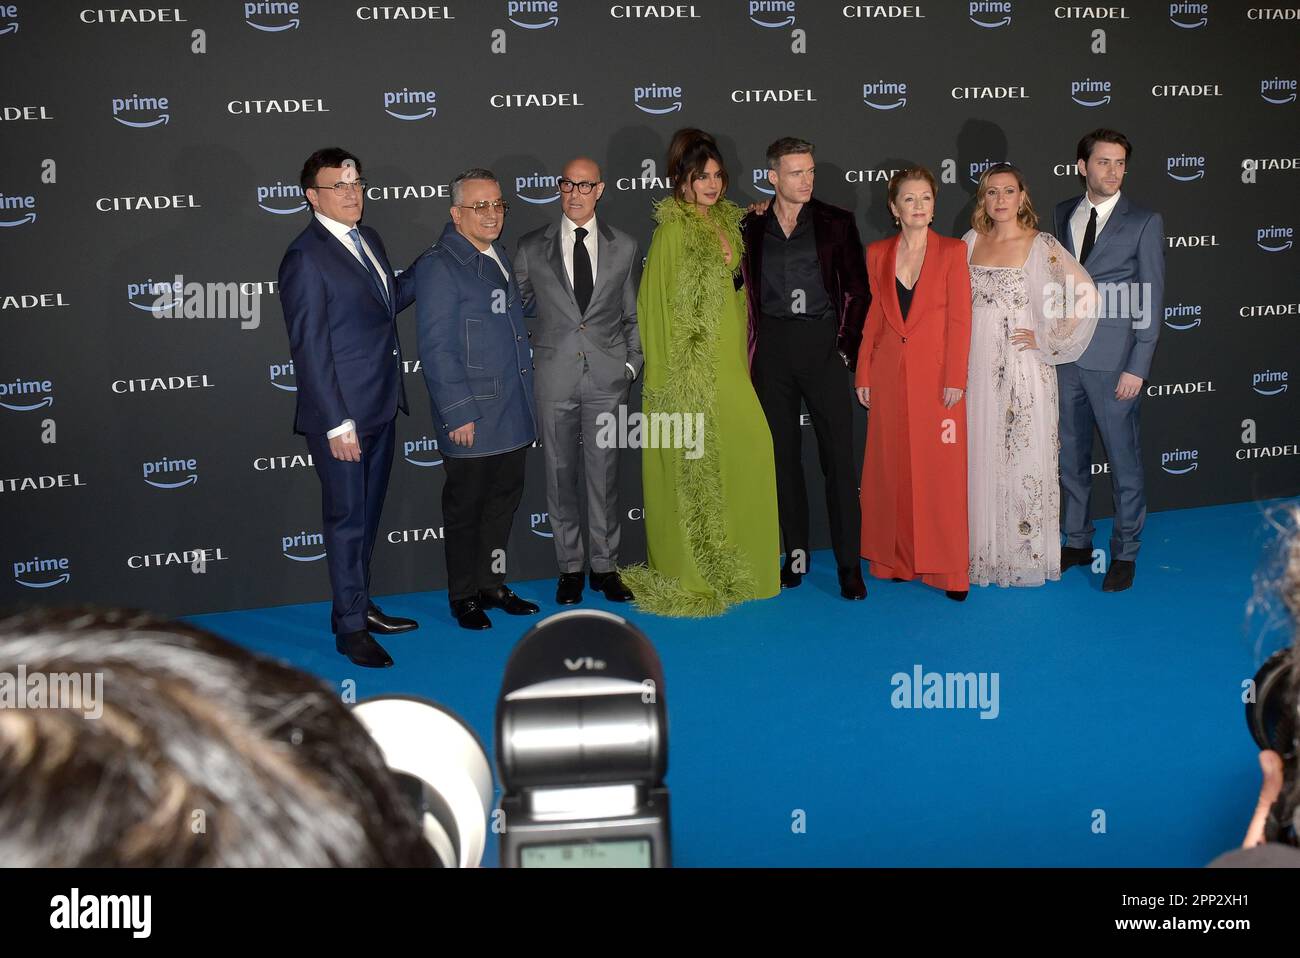 Rome, Italy. 21st Apr, 2023. Anthony Russo, Joe Russo, Stanley Tucci, Priyanka Chopra Jonas, Richard Madden, Lesley Manville, Angela Russo Otstot and David Weil attend Citadel tv series premiere in Rome, Italy. Credit: Vincenzo Nuzzolese/Alamy Live News Stock Photo